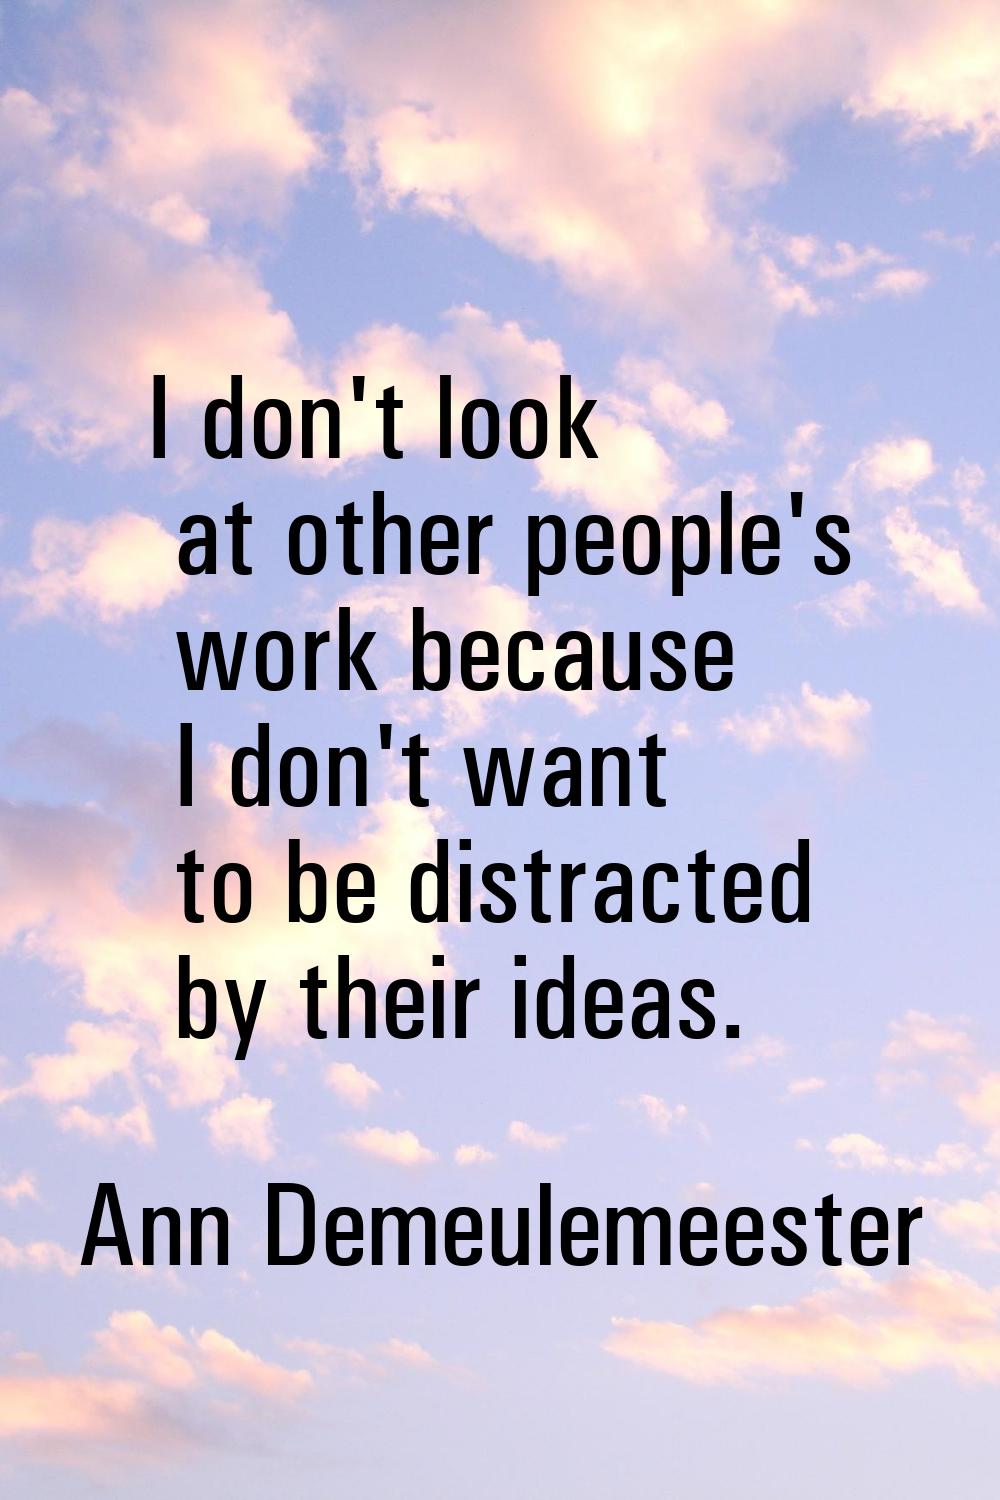 I don't look at other people's work because I don't want to be distracted by their ideas.